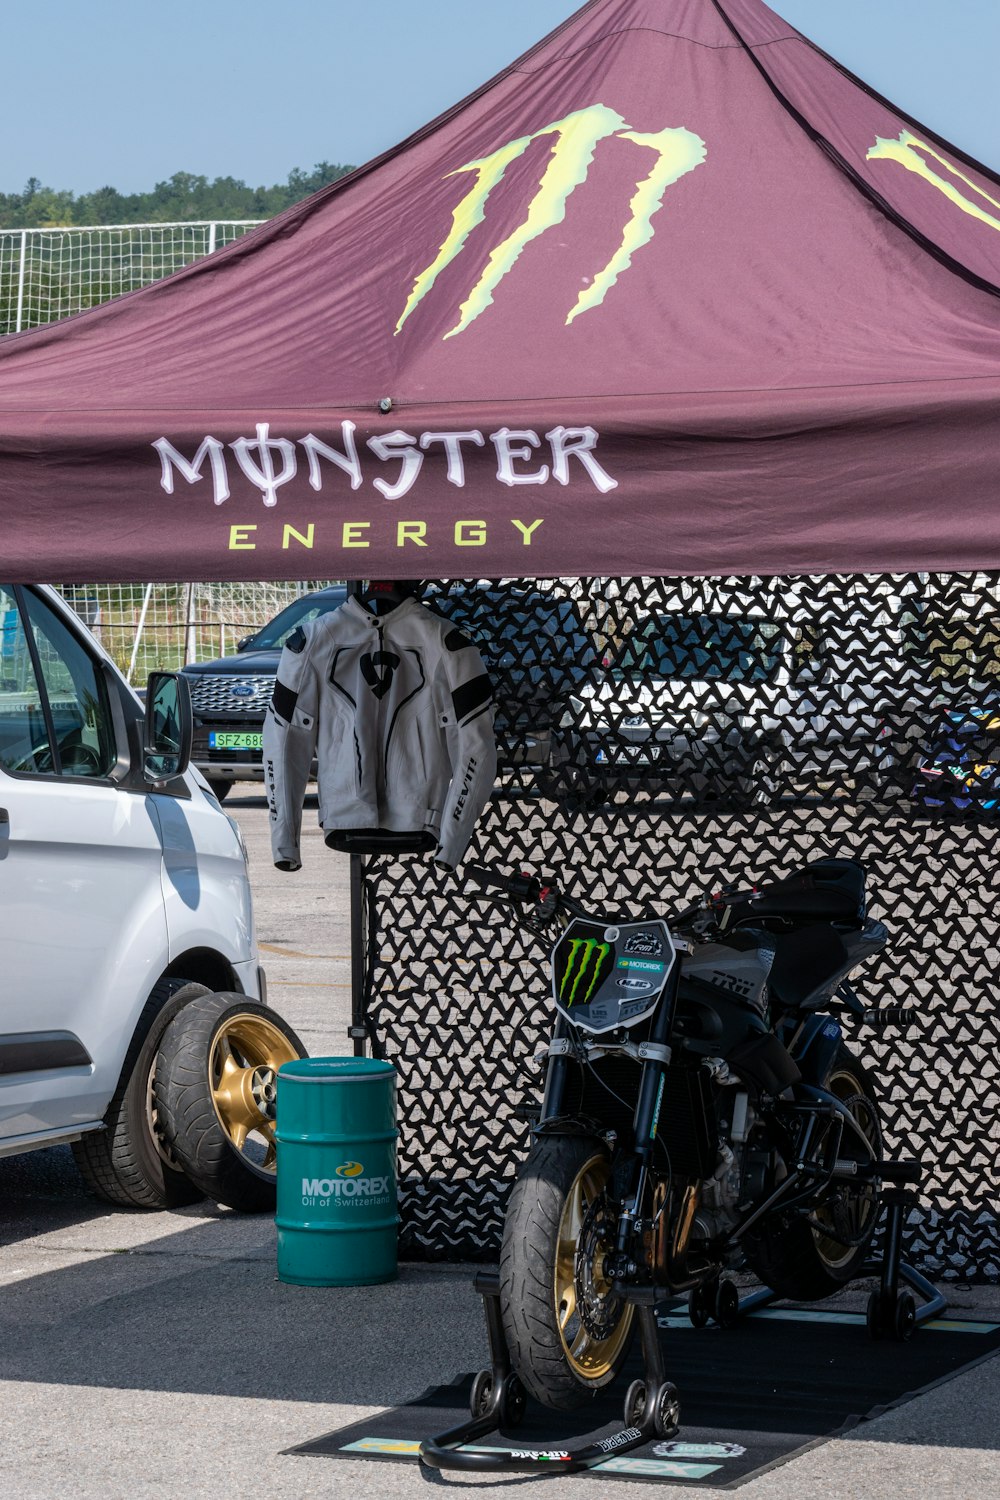 a motorcycle parked under a tent next to a white van